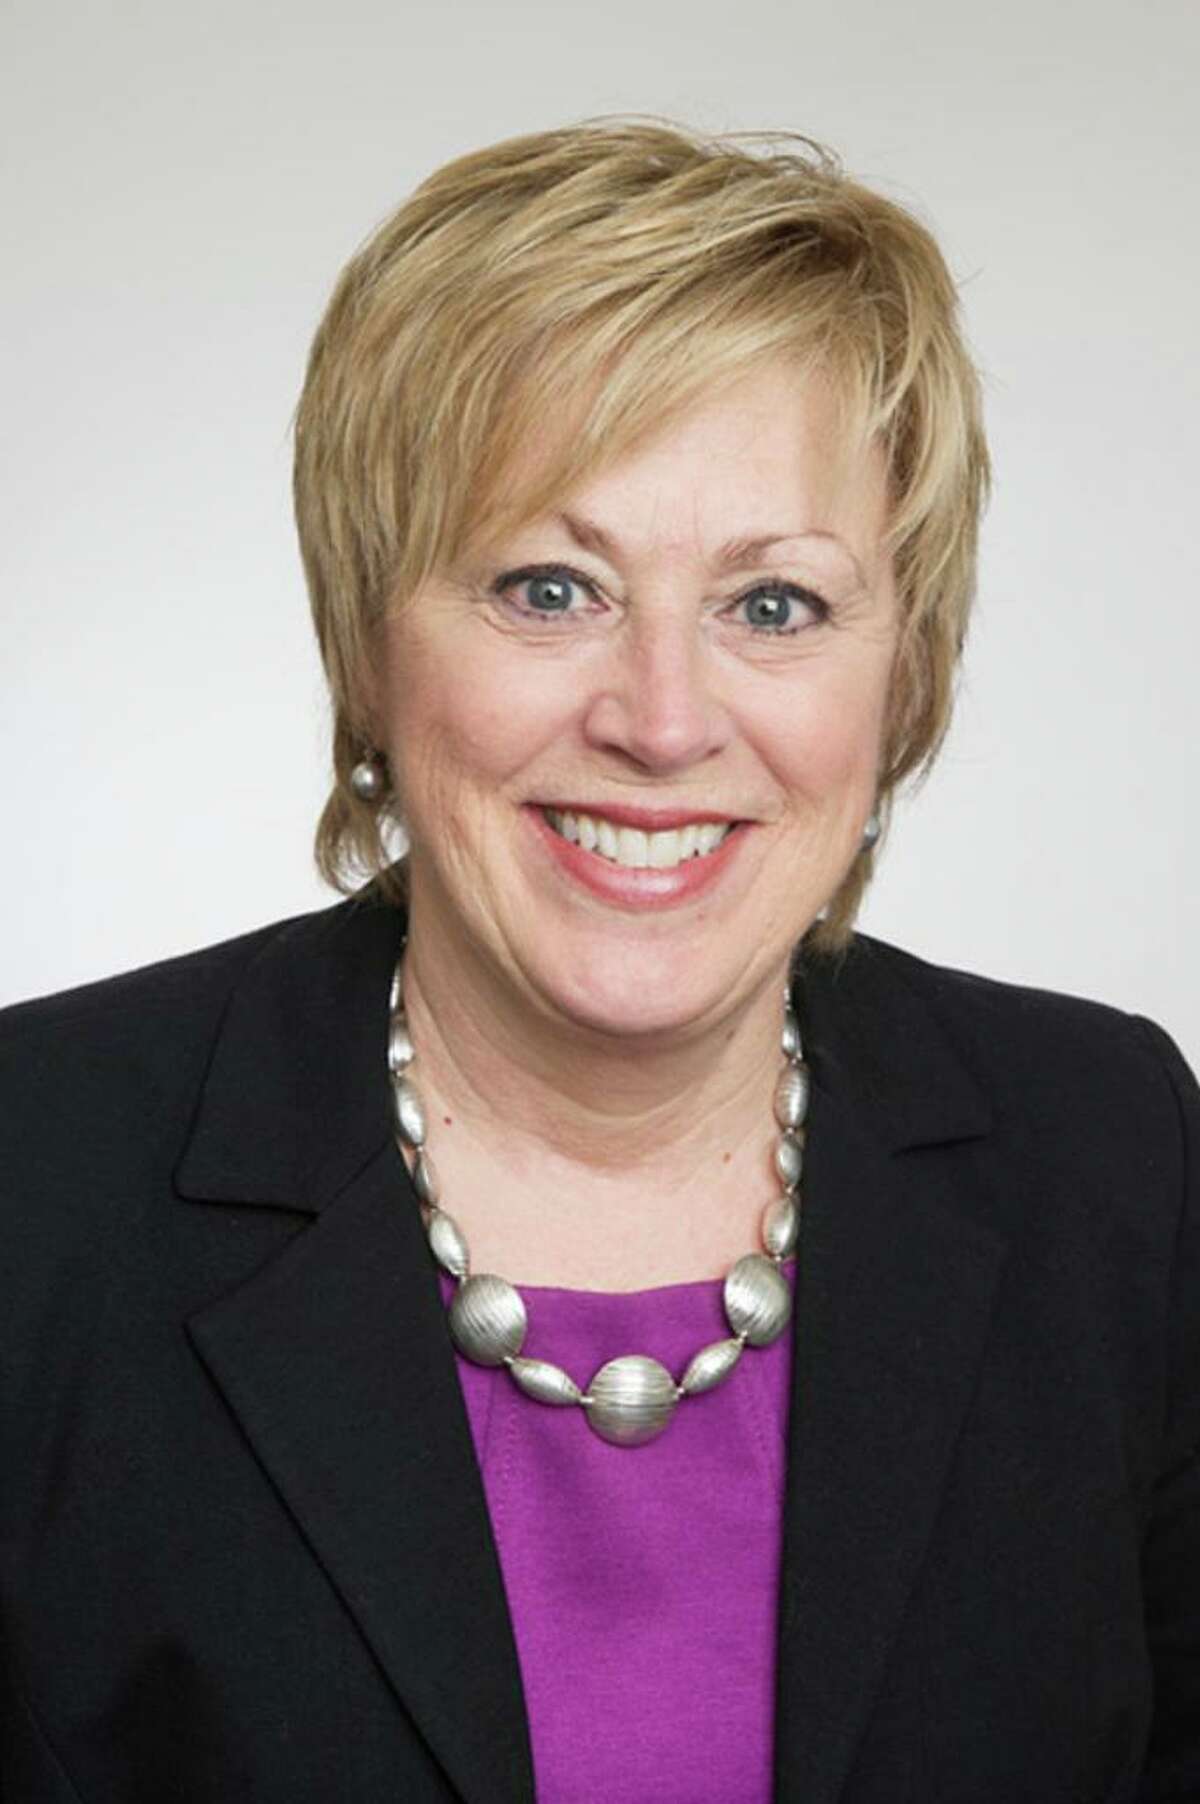 Denise George has been named Sharon Hospital's acting president, effective Feb. 4.